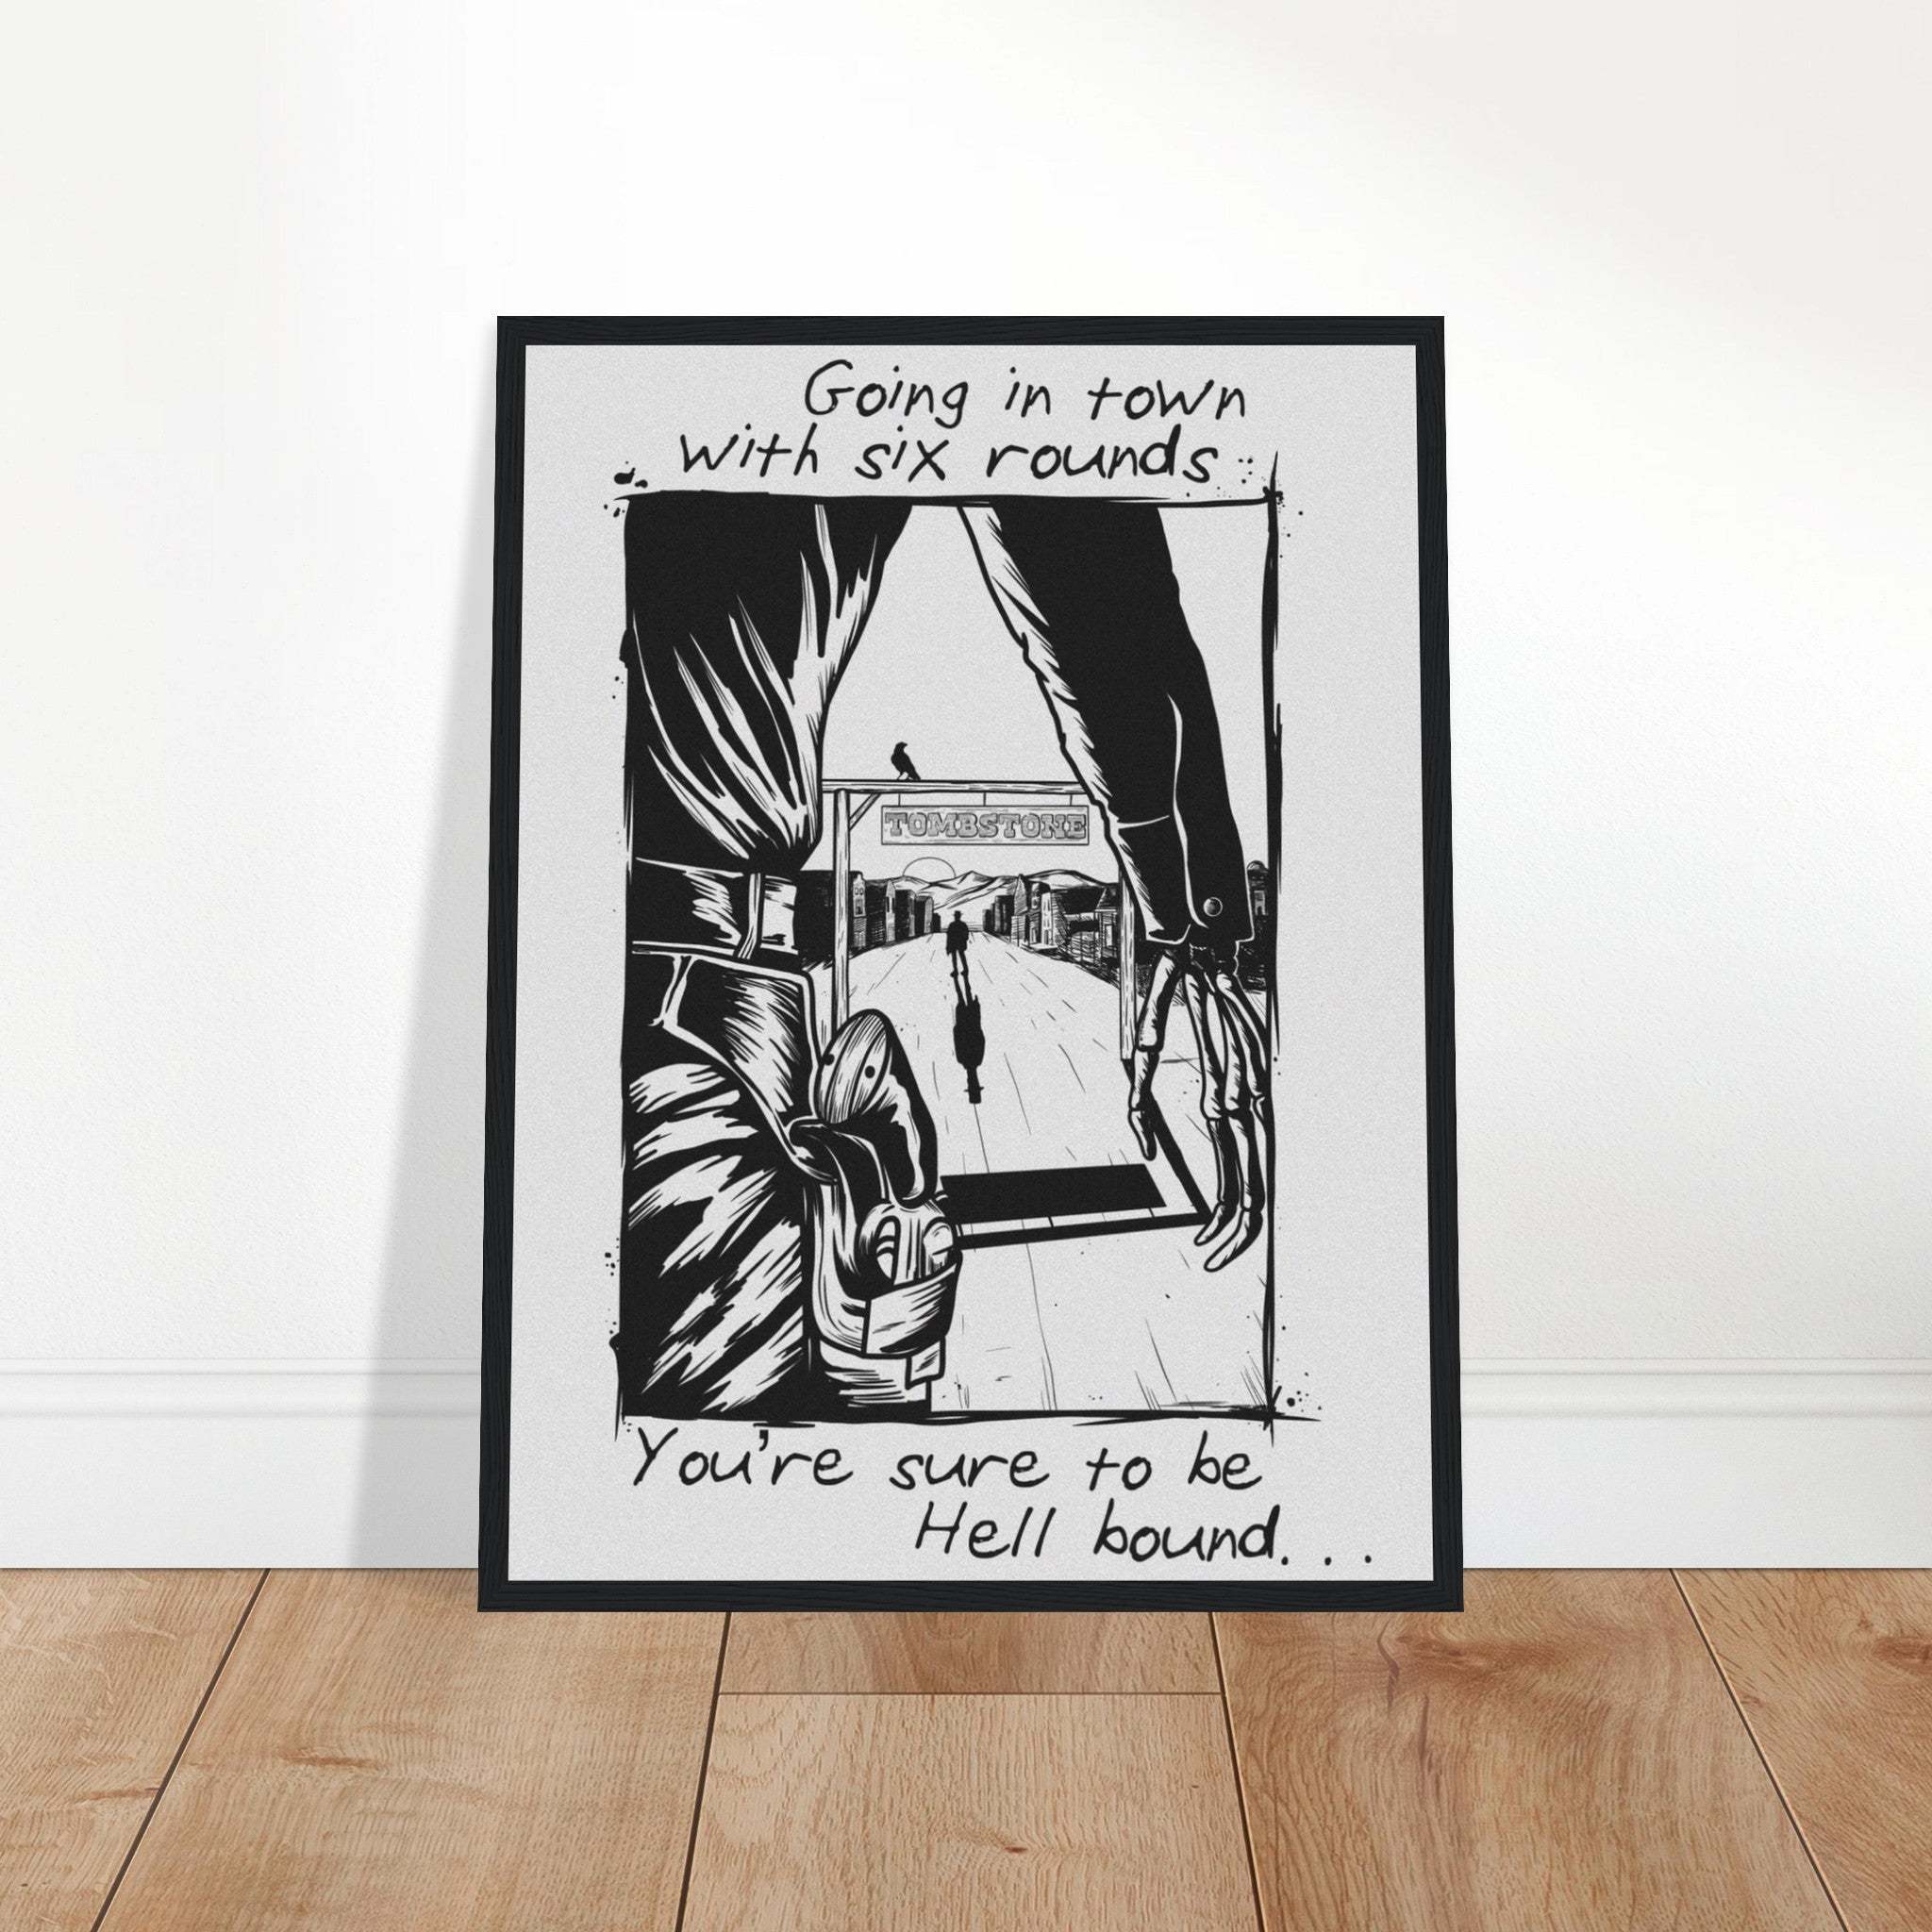 Colter Wall Inspired Living on the Sand Wooden Framed Graphic Print